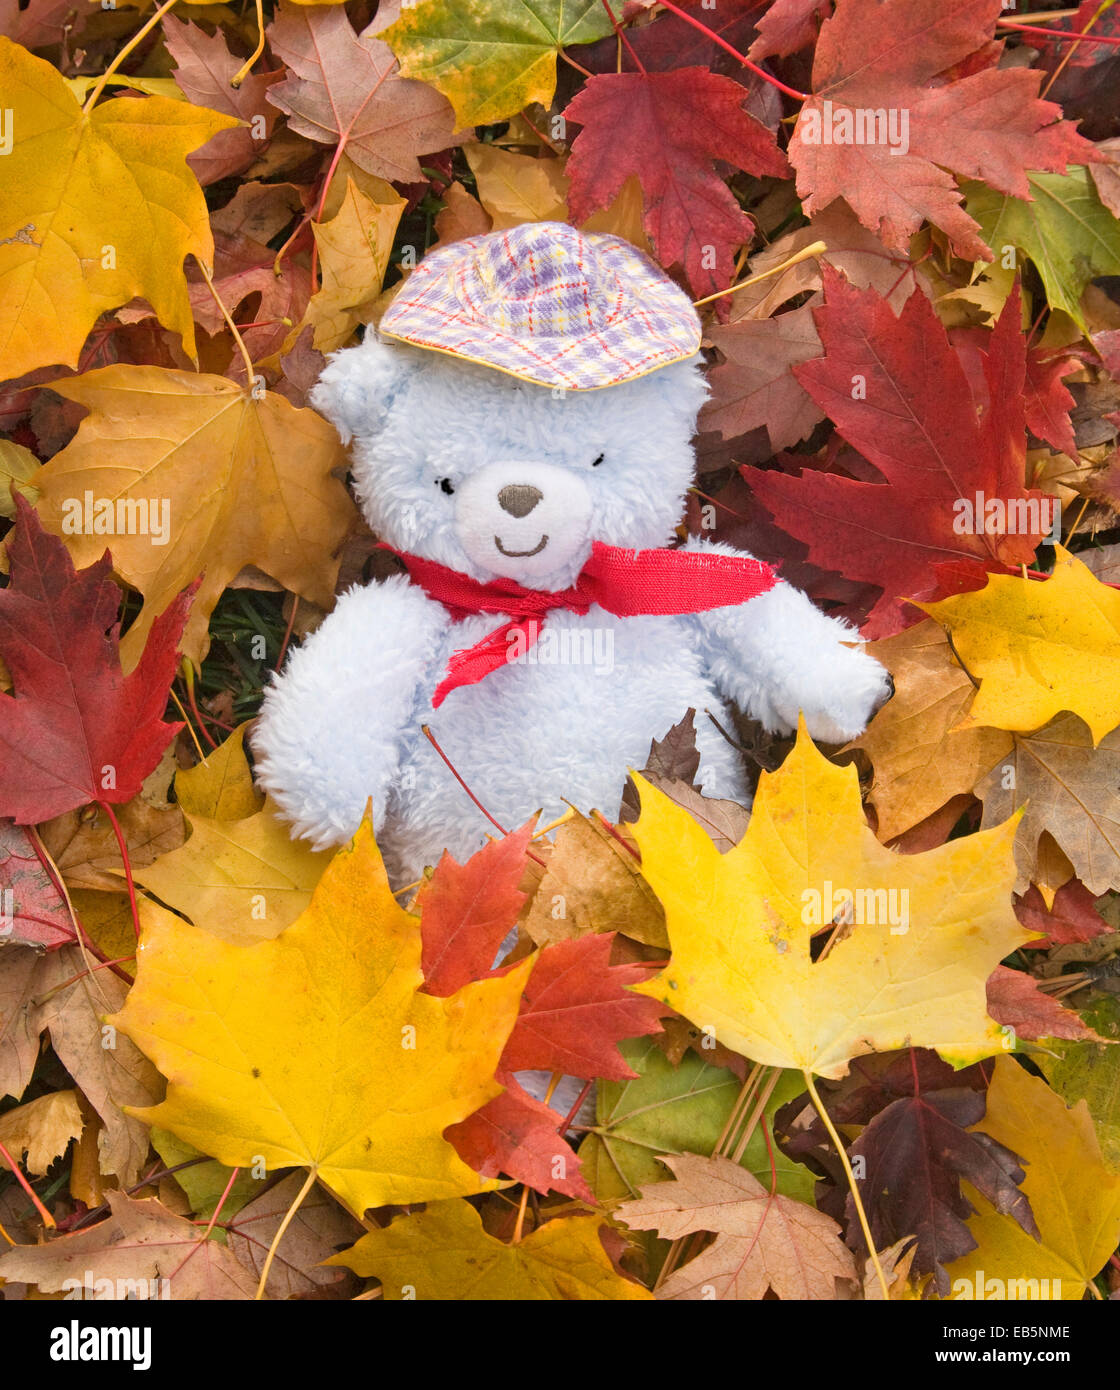 A teddy bear playing in autumn leaves Stock Photo